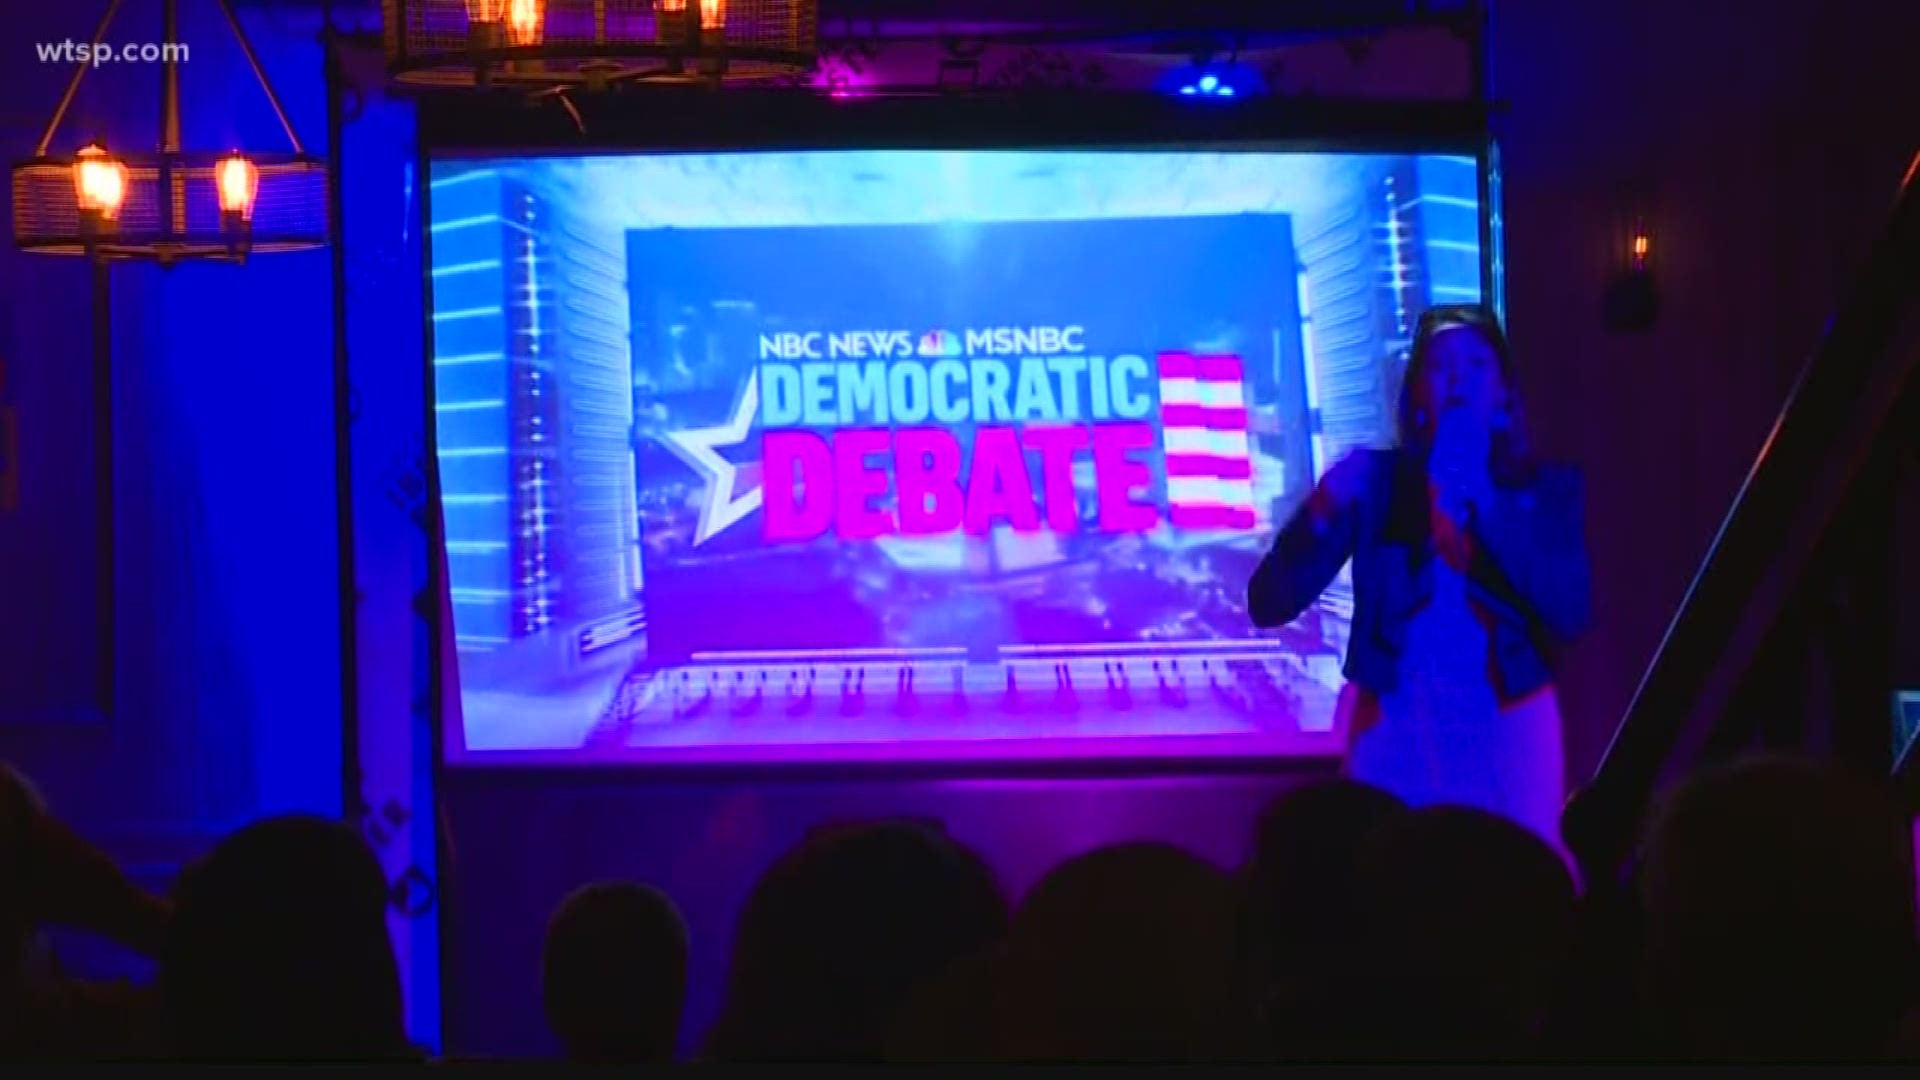 Debate watchers were interested in what the candidates had to say on the topics that affected them directly, like health care and student loan debts, but most of them said they would vote for whoever the Democrats nominate because they don't want a second Trump term.